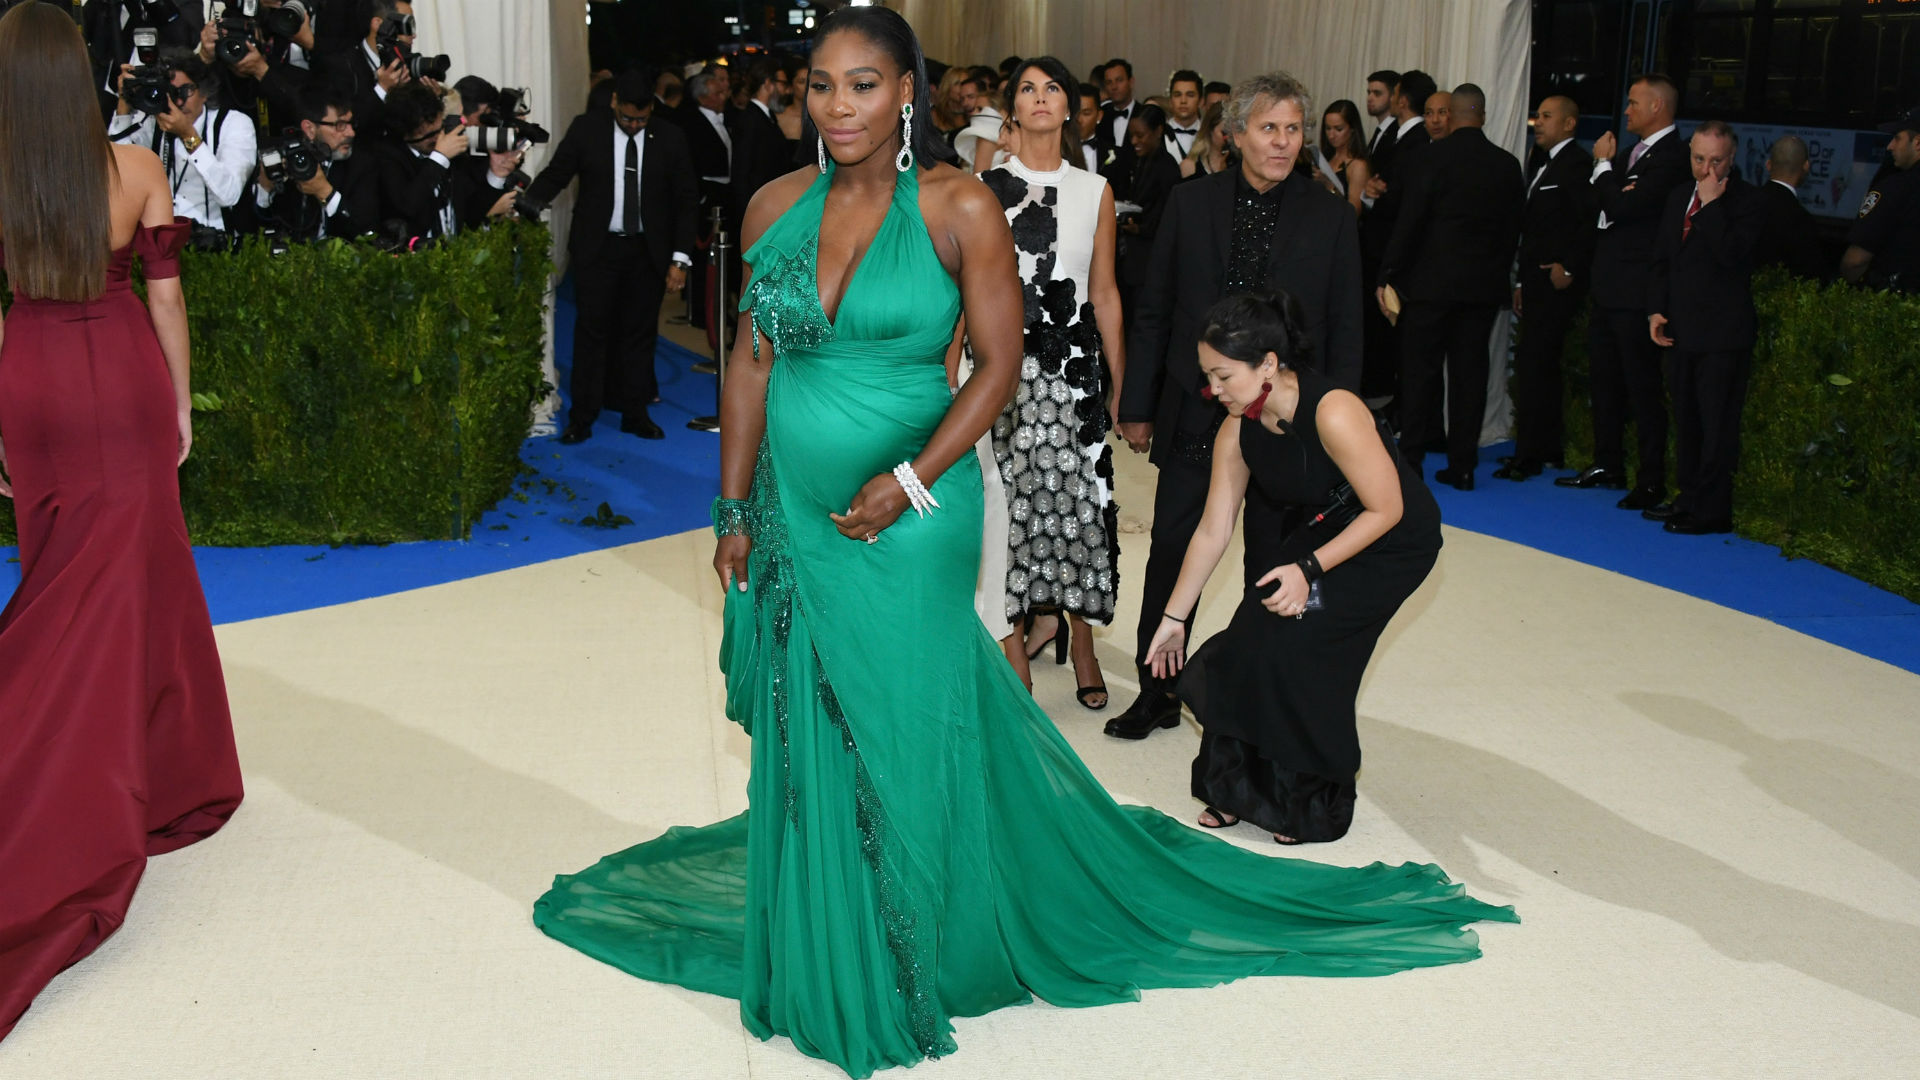 A-Rod, Tom Brady and Serena Williams dazzle at 2017 Met Gala | Other Sports | Sporting ...1920 x 1080